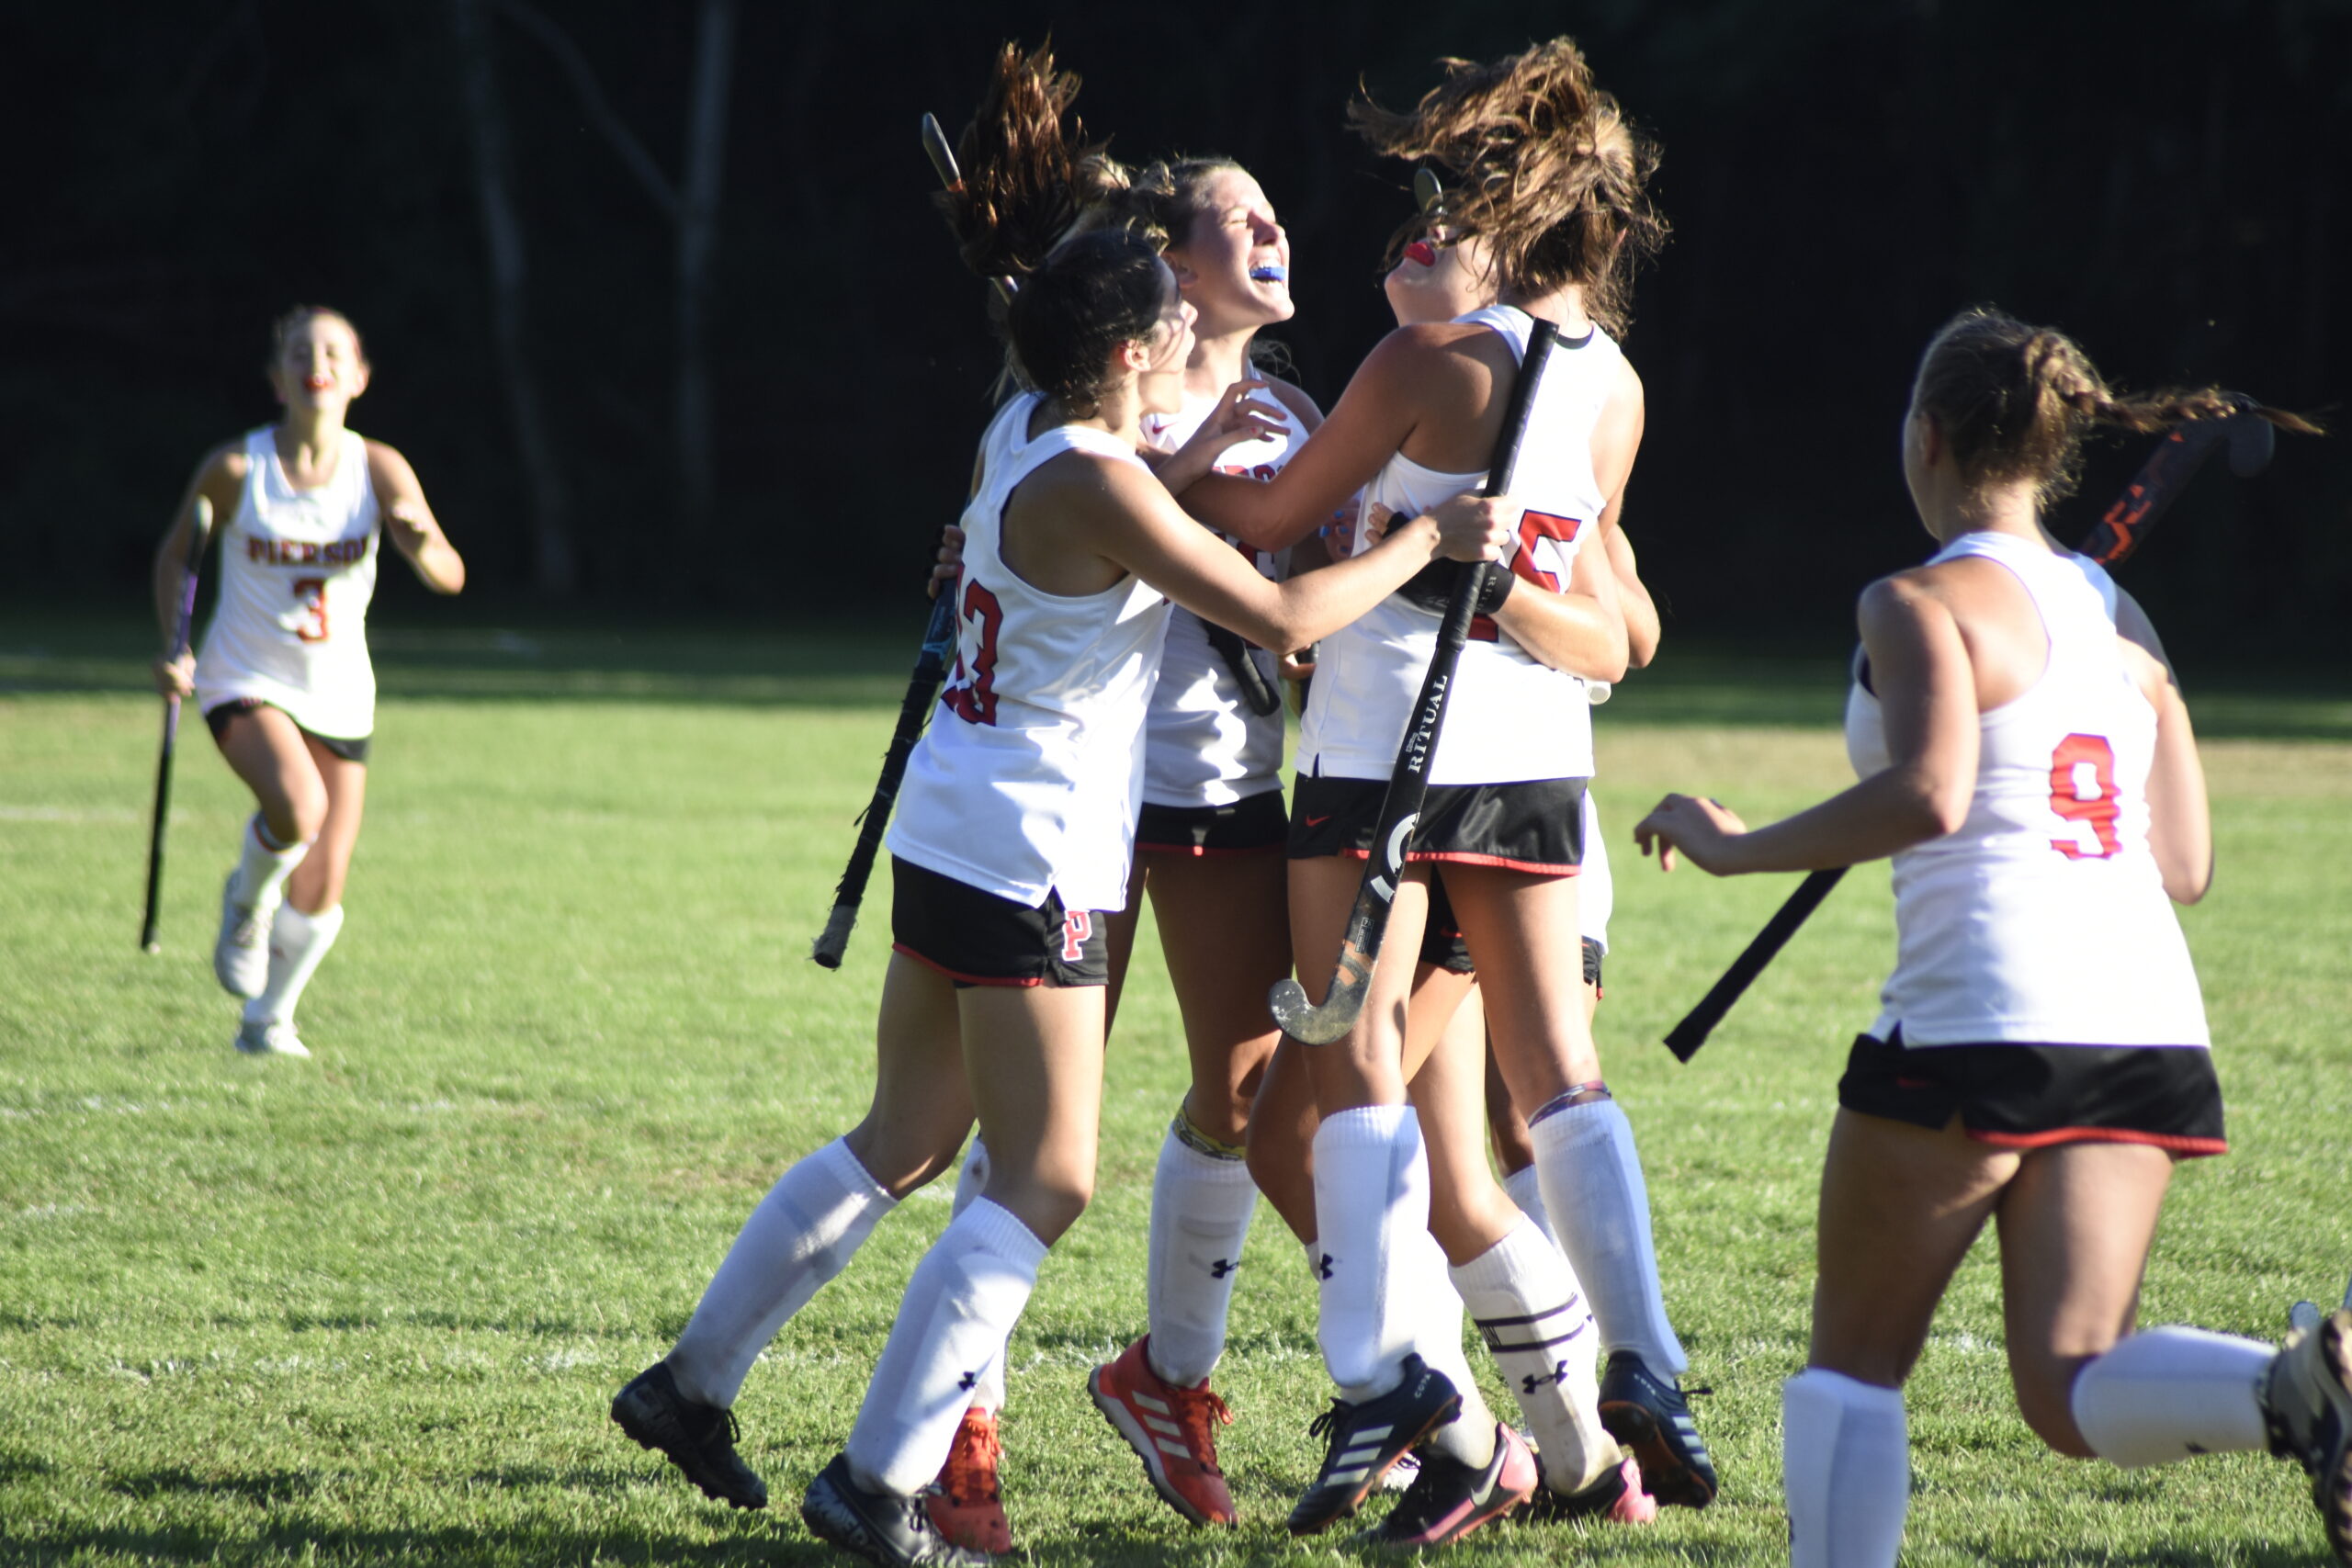 The Whalers celebrate Sophia Beech’s goal that gave them a late 1-0 lead, leading to their 2-0 victory over Islip on September 8.     DREW BUDD